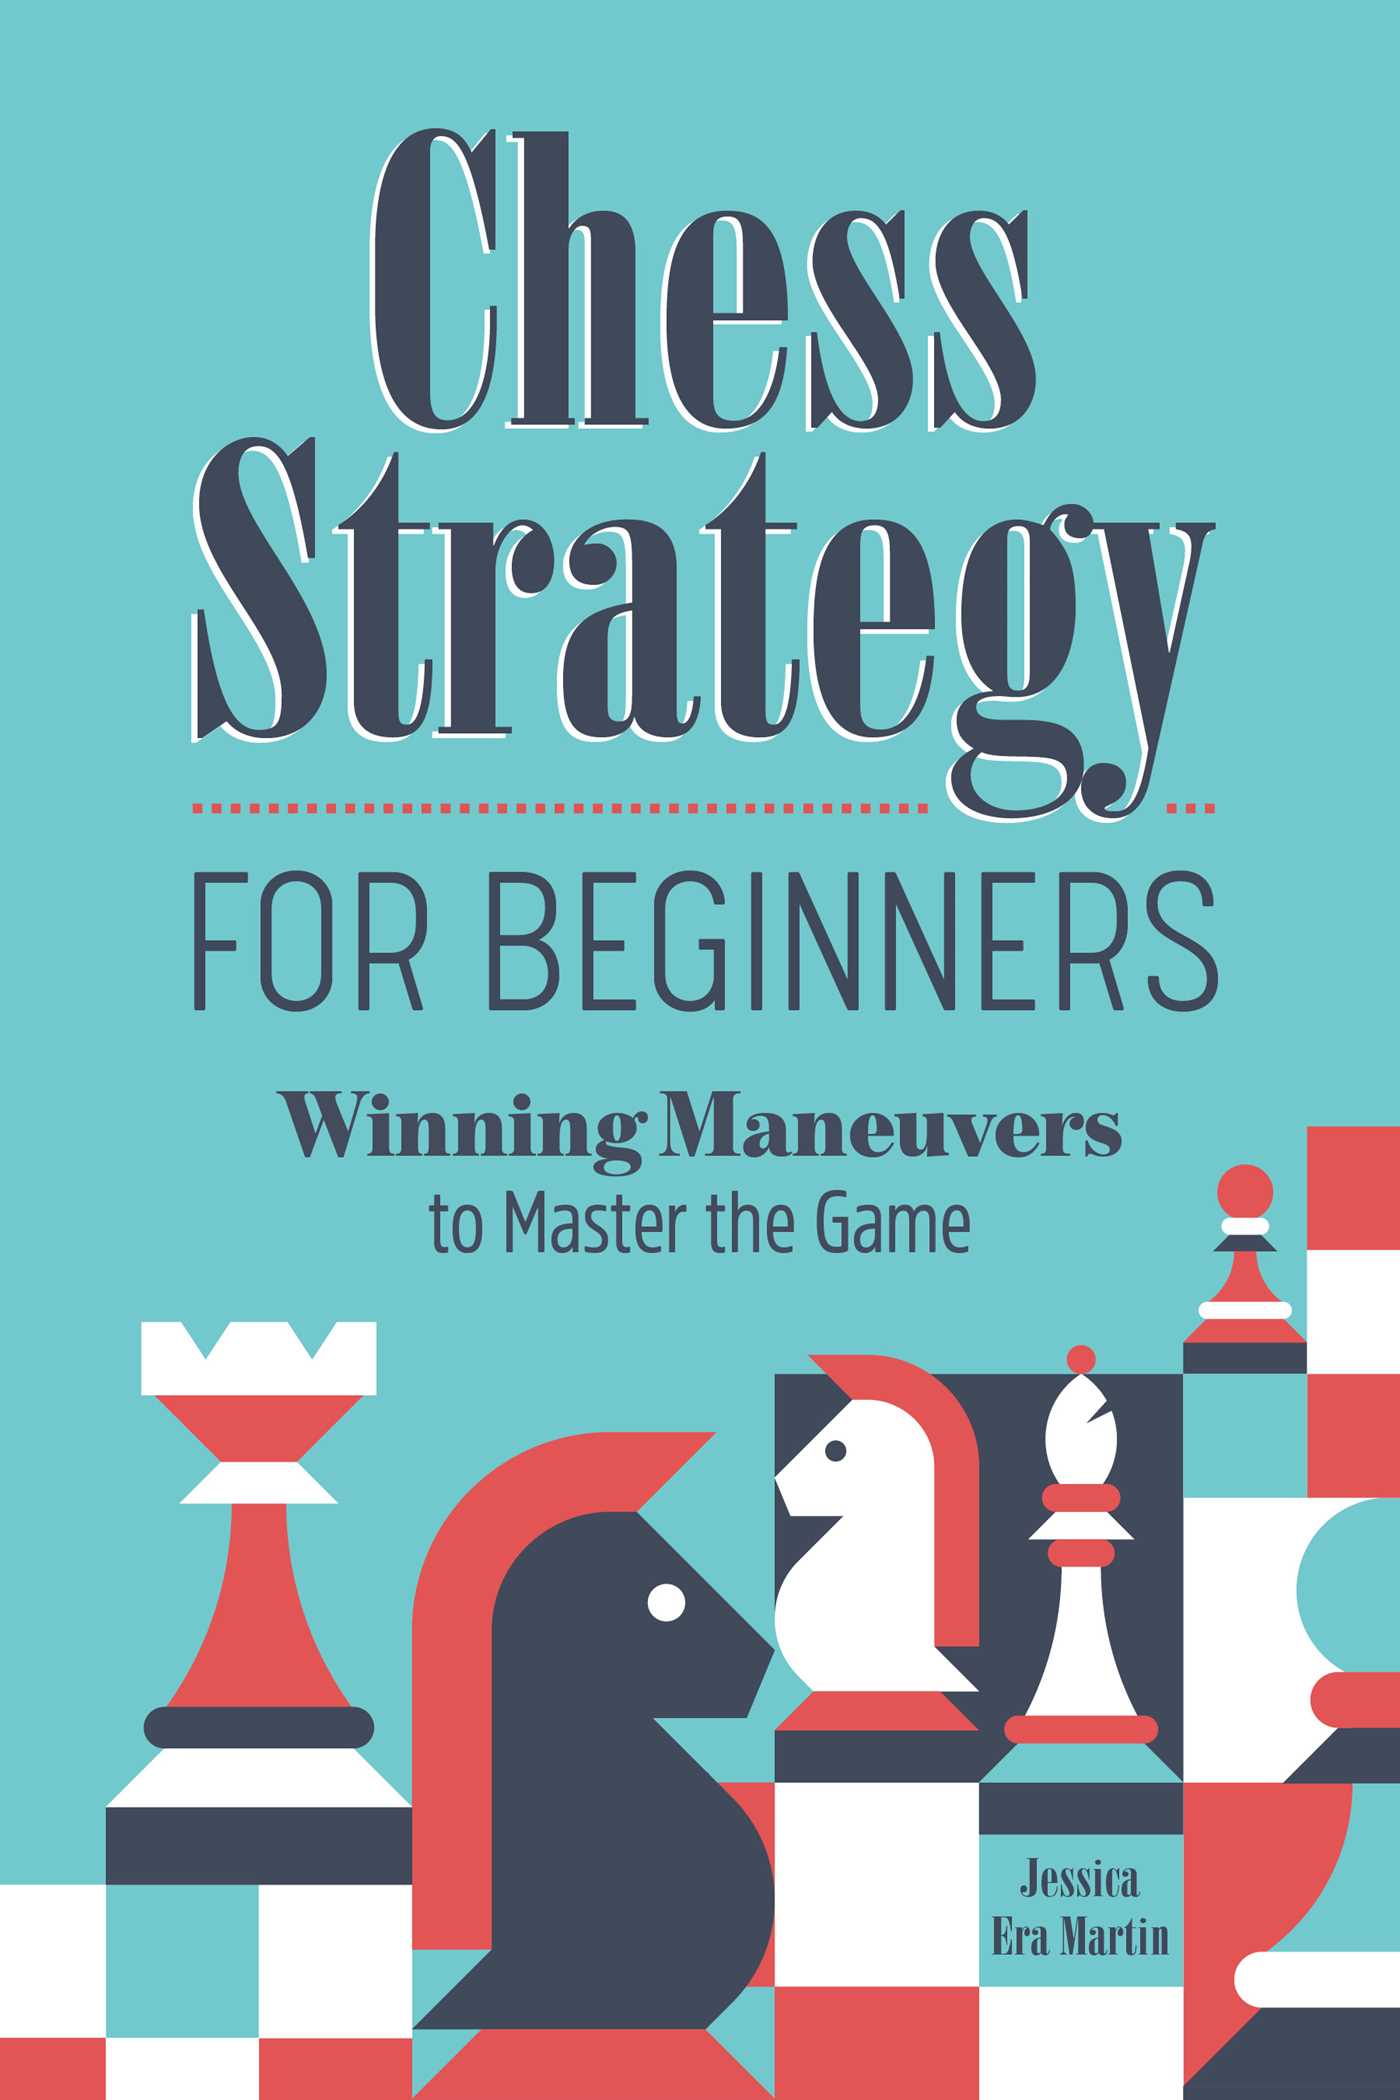 Chess Strategy for Beginners : Winning Maneuvers to Master the Game (Paperback) - image 1 of 1